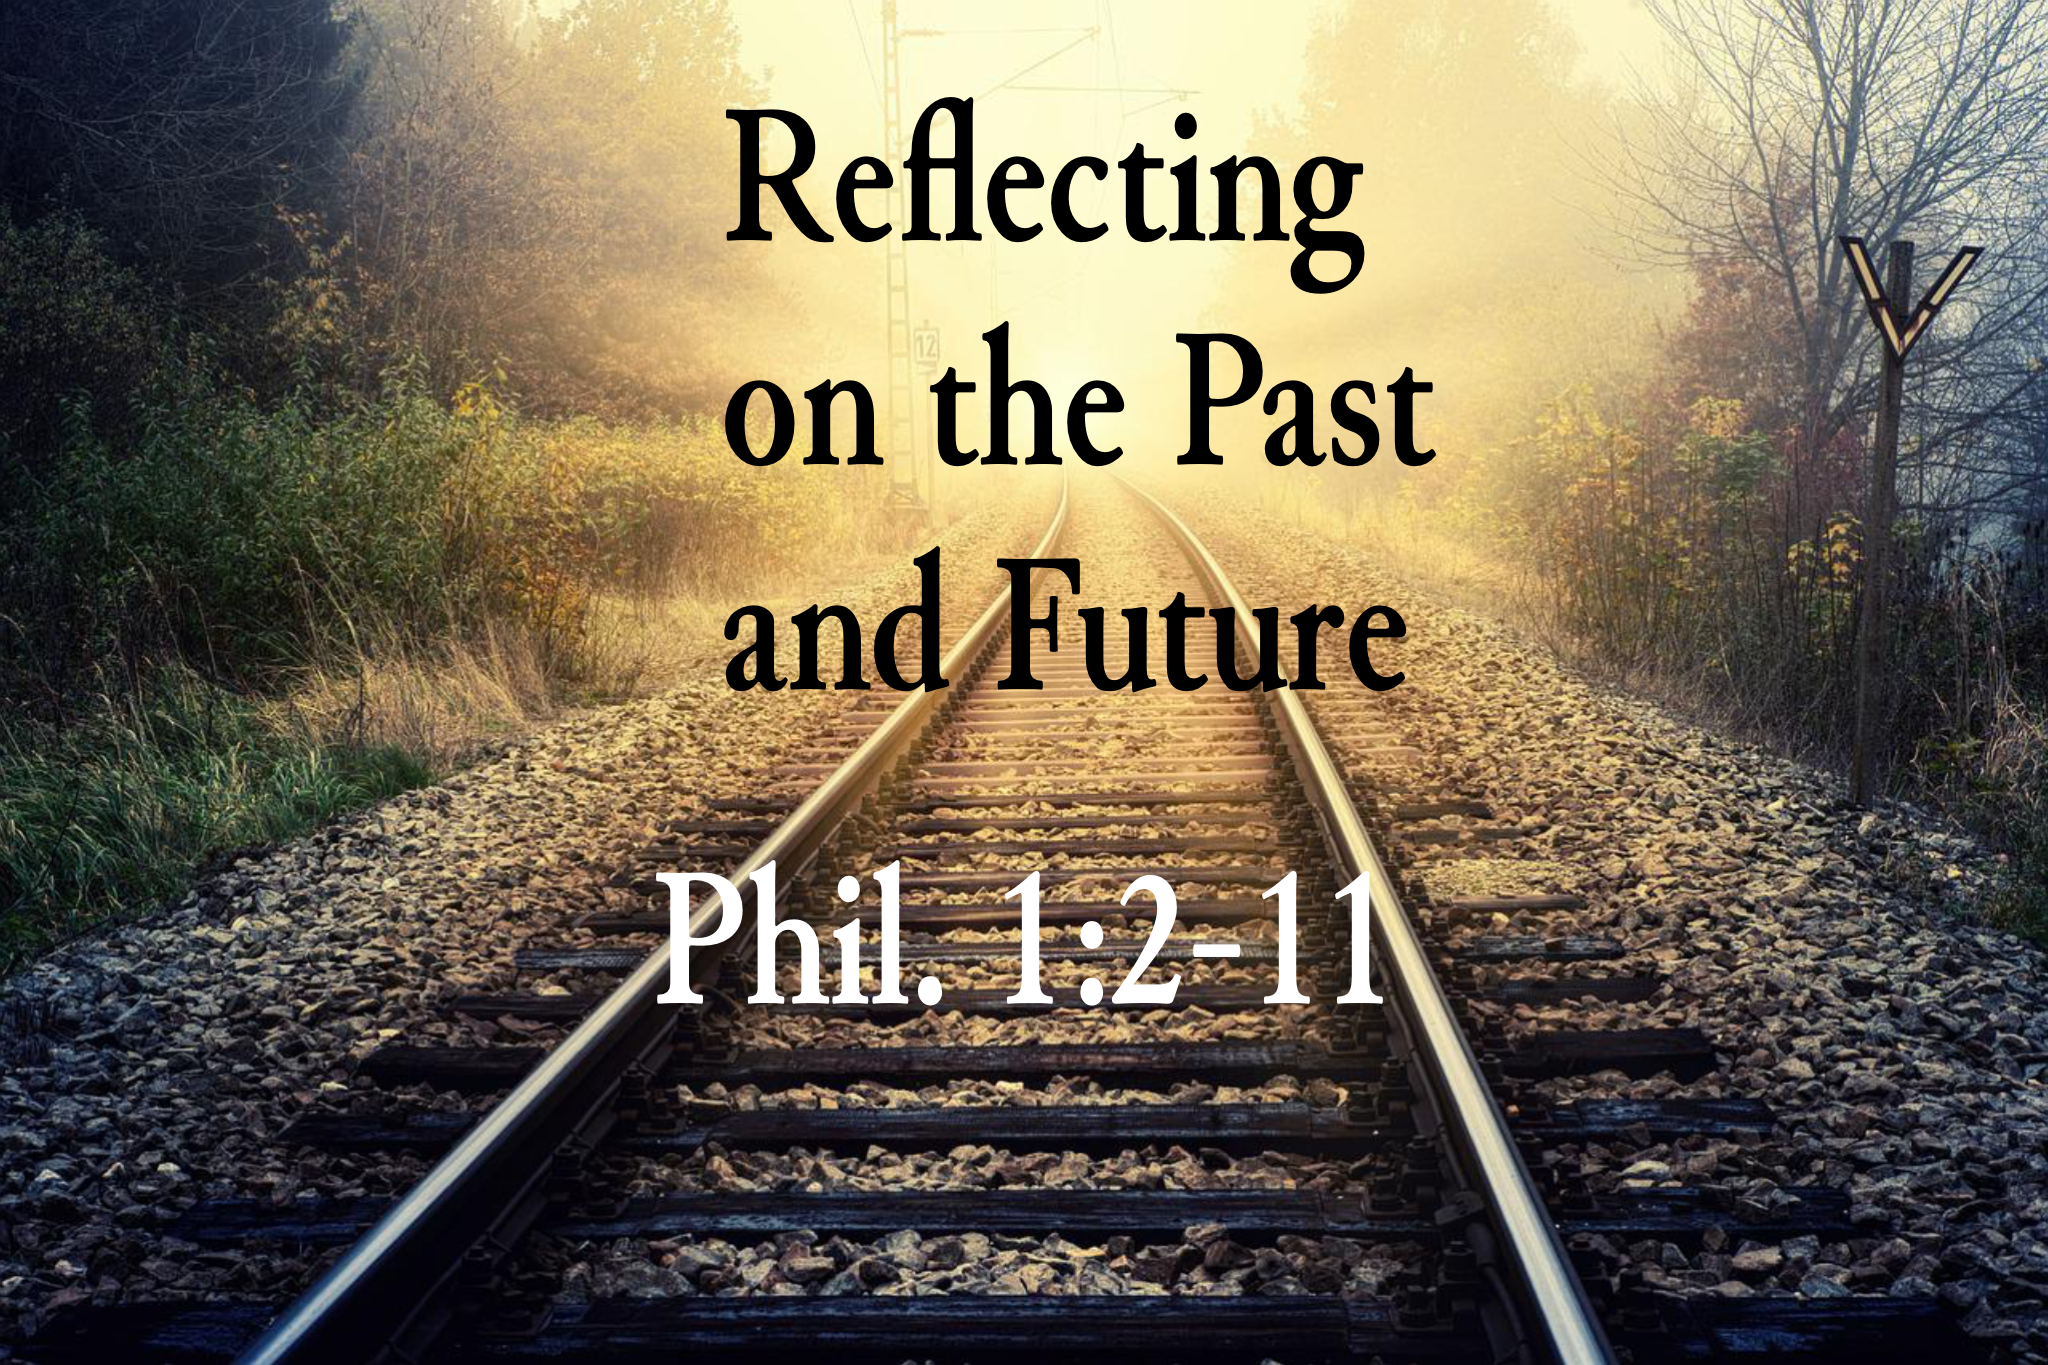 "Reflecting on the Past and Future"